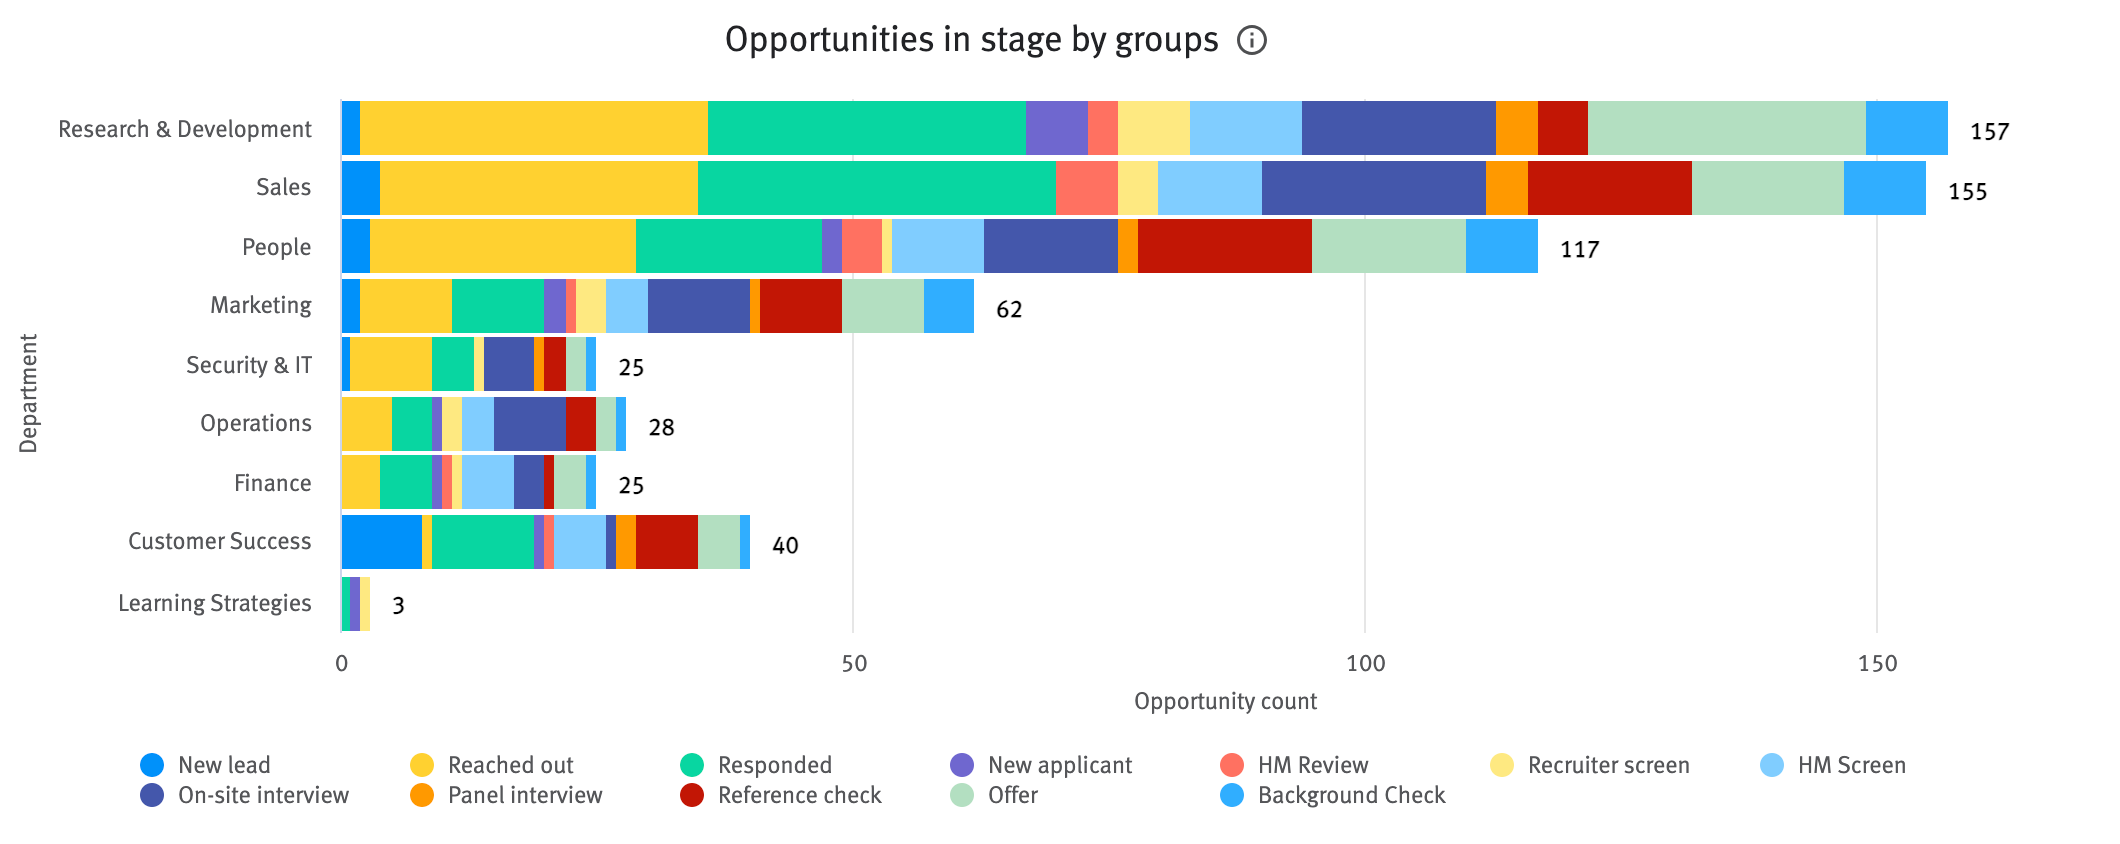 Opportunities in stage by groups chart